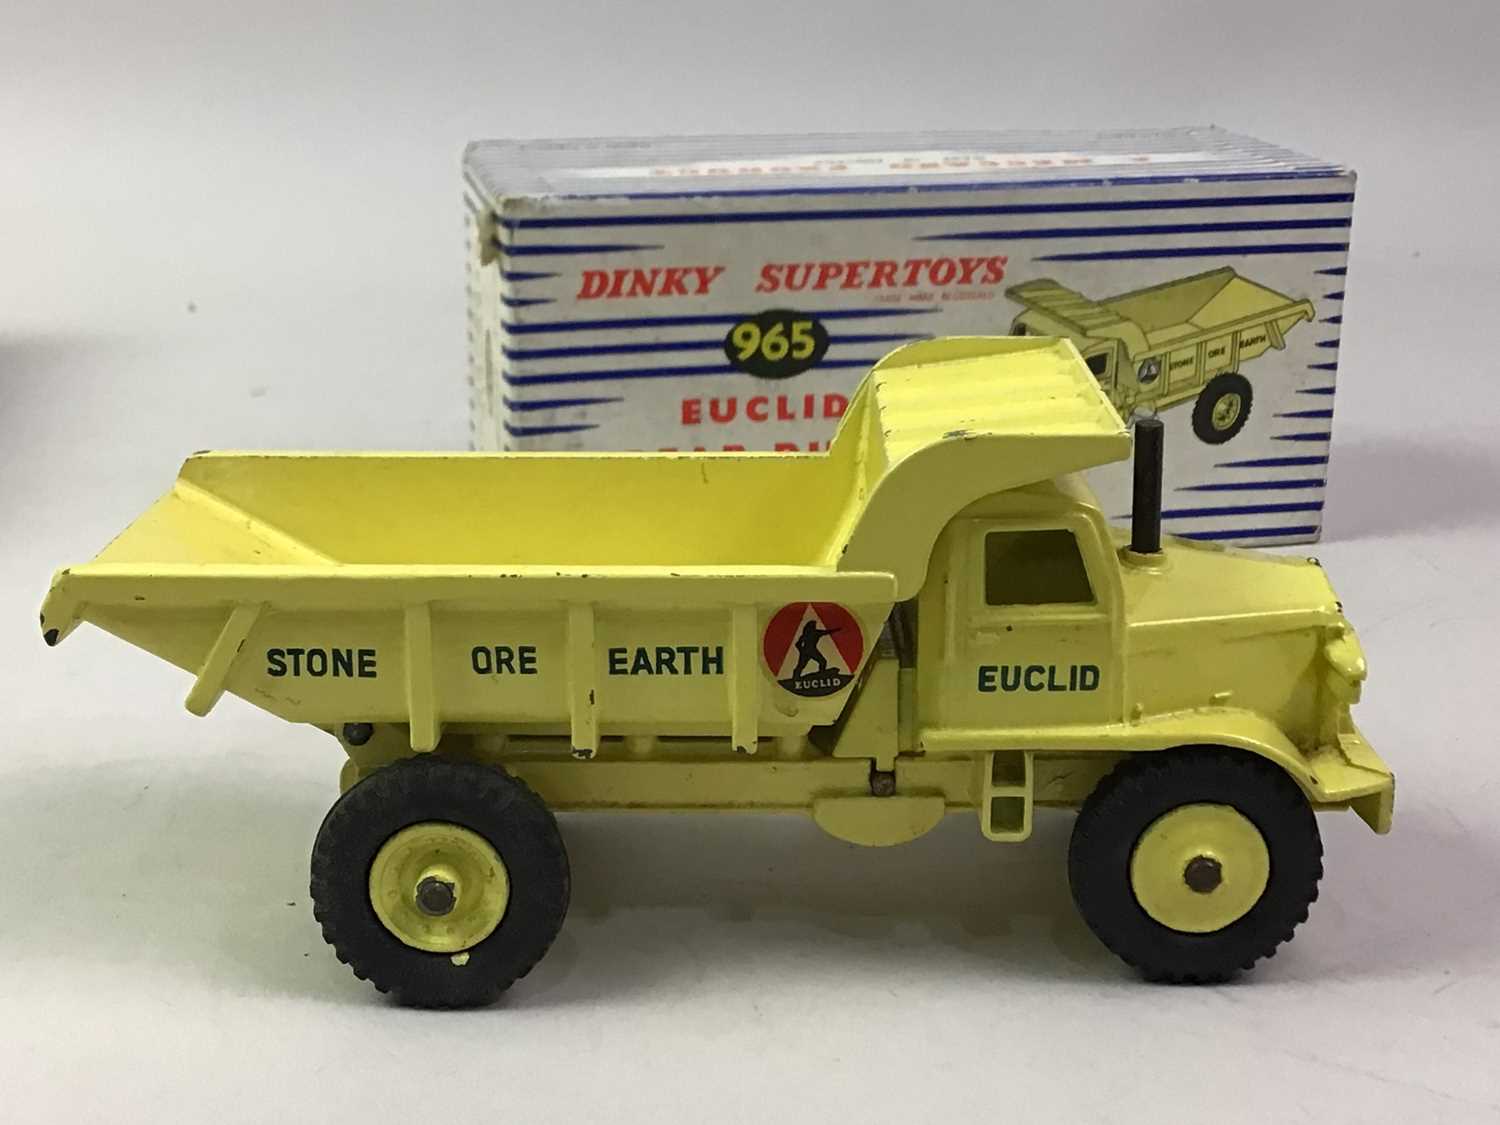 DINKY TOYS, NO. 965 EUCLID REAR DUMP TRUCK - Image 3 of 3